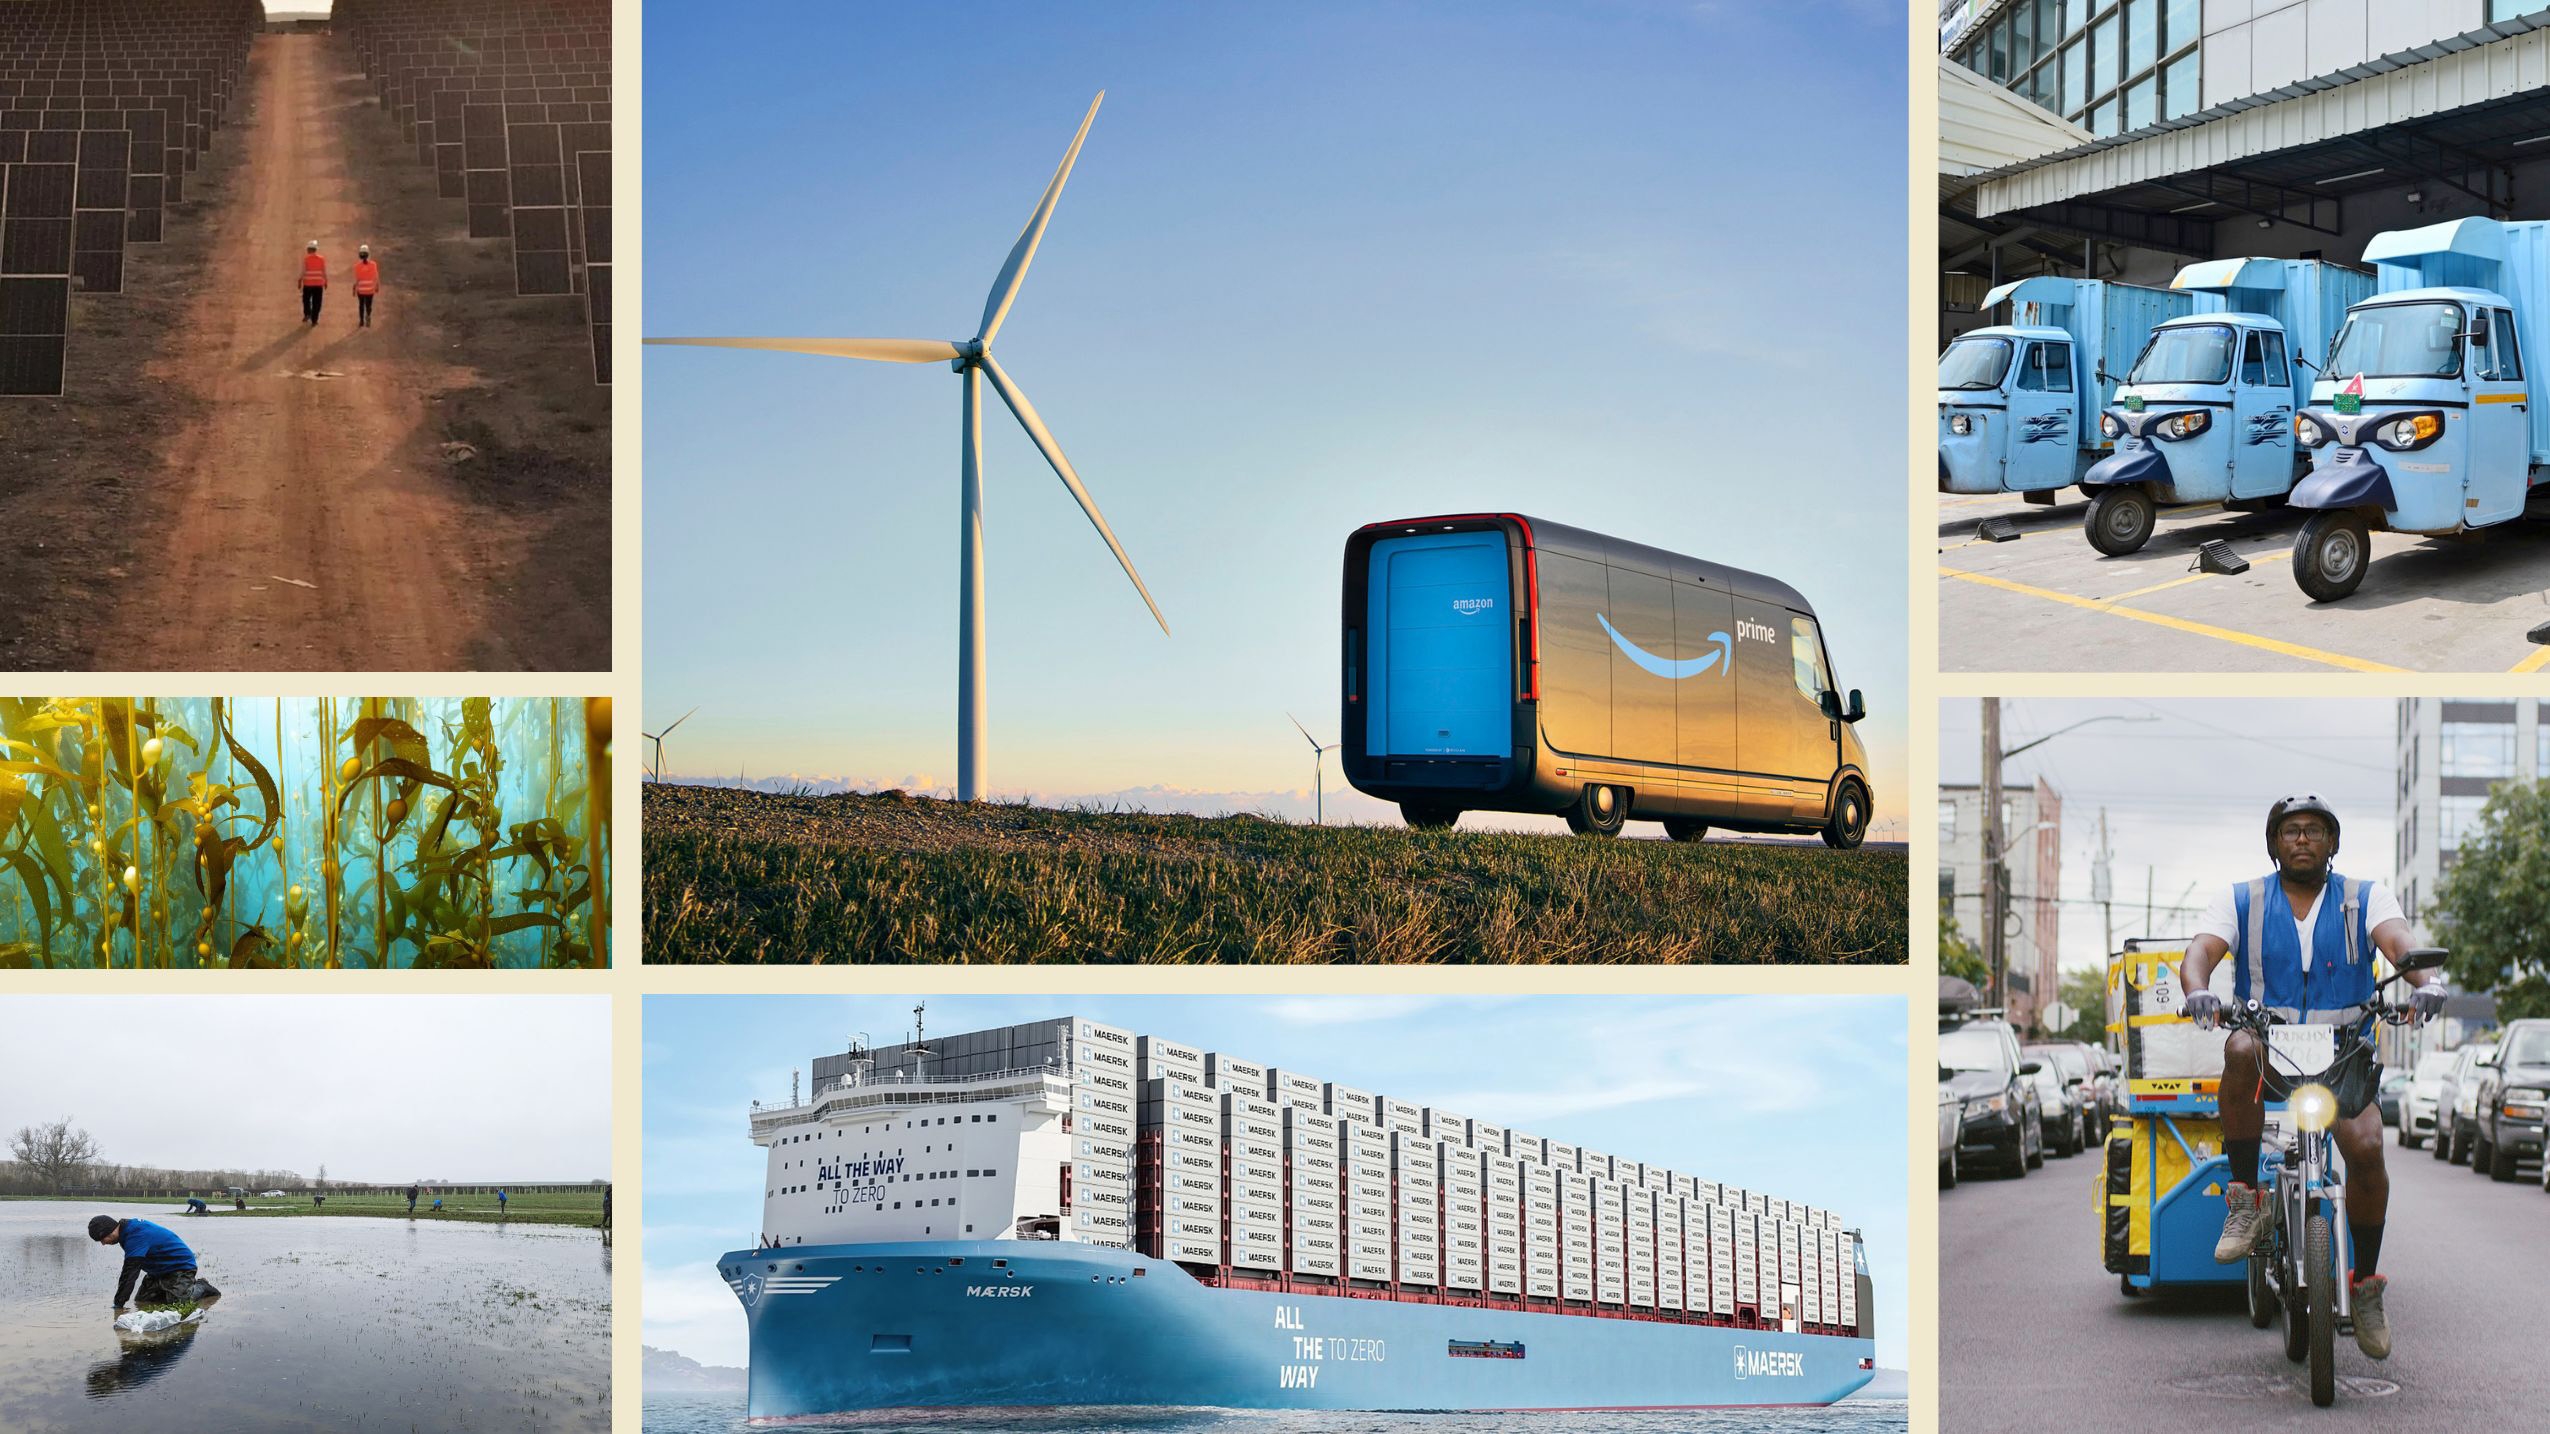 An image with various photos inside of it. The image shows a wind farm with an Amazon delivery van parked on it, a large cargo ship, seaweed under water, and a solar farm.